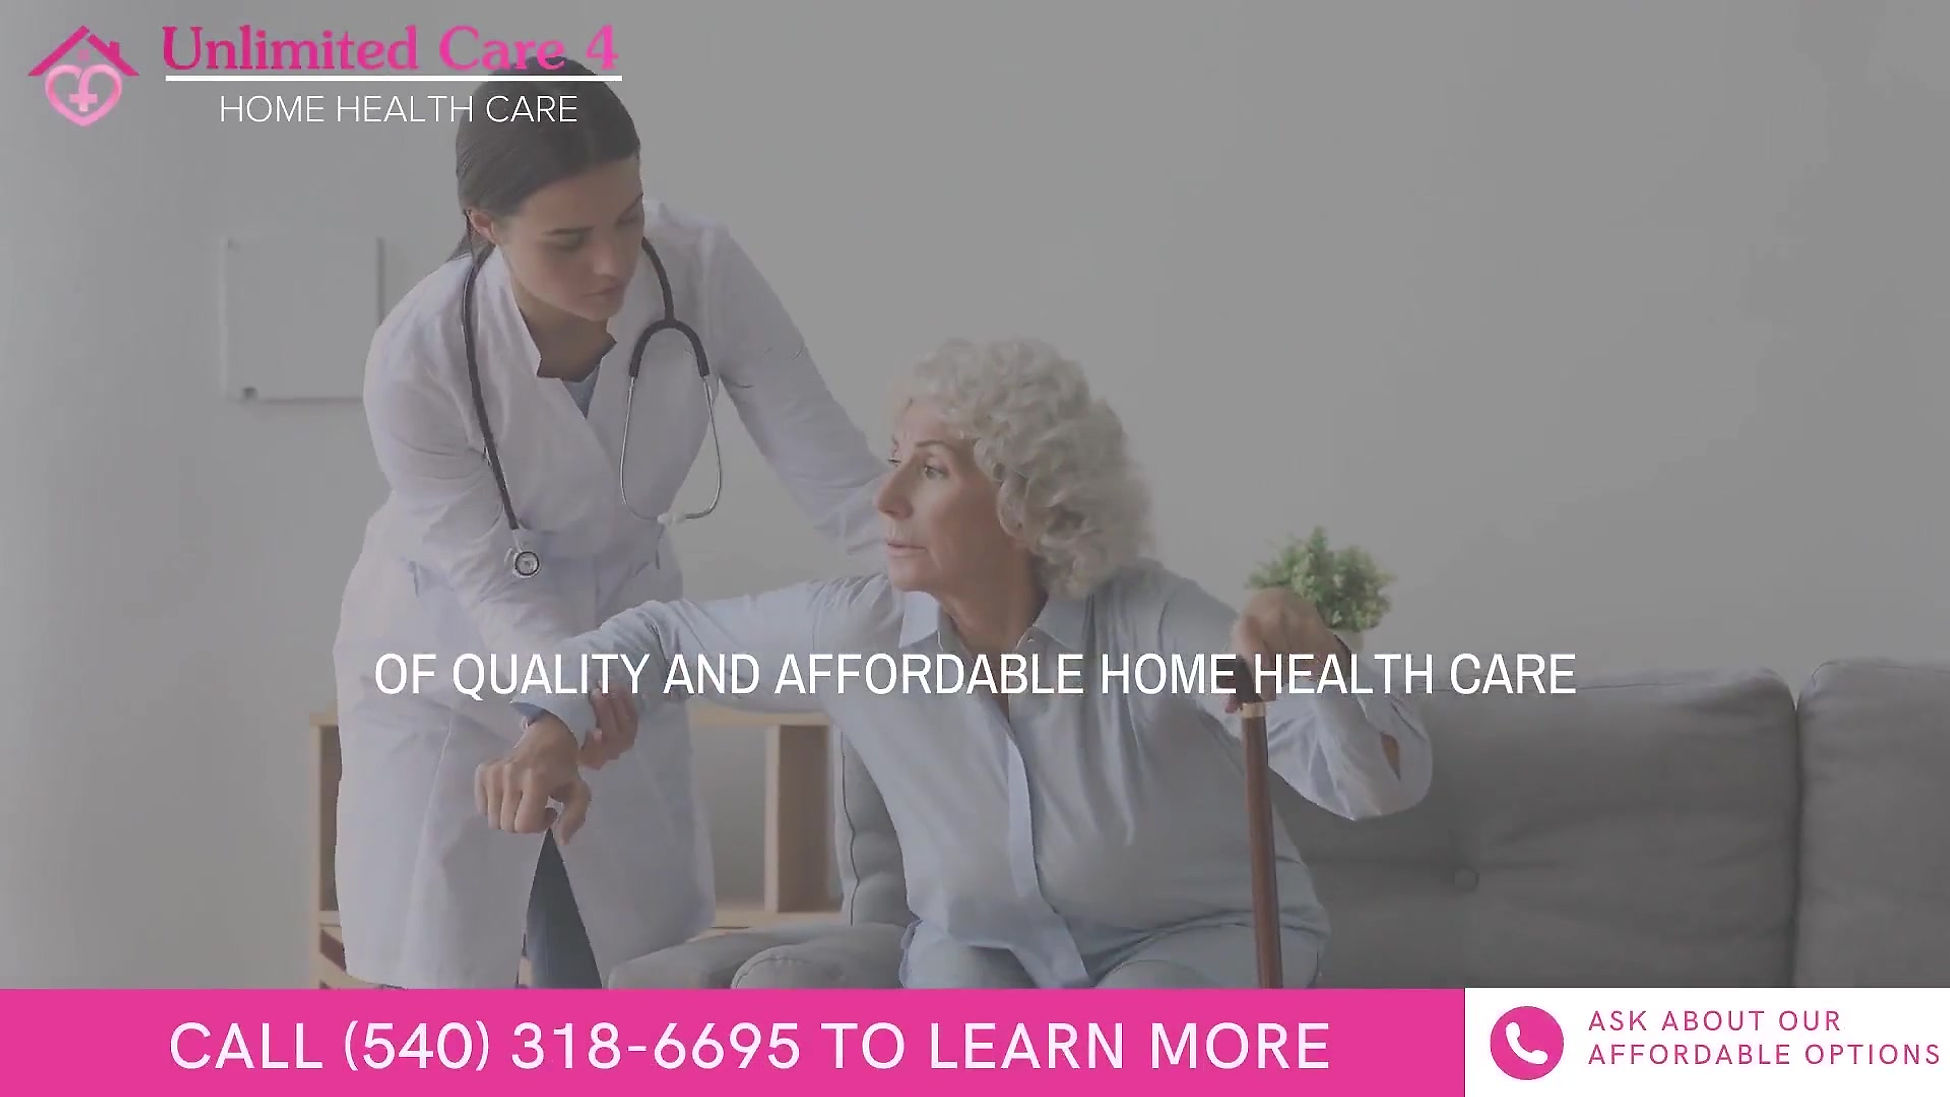 Unlimited Care 4 Home Health Care